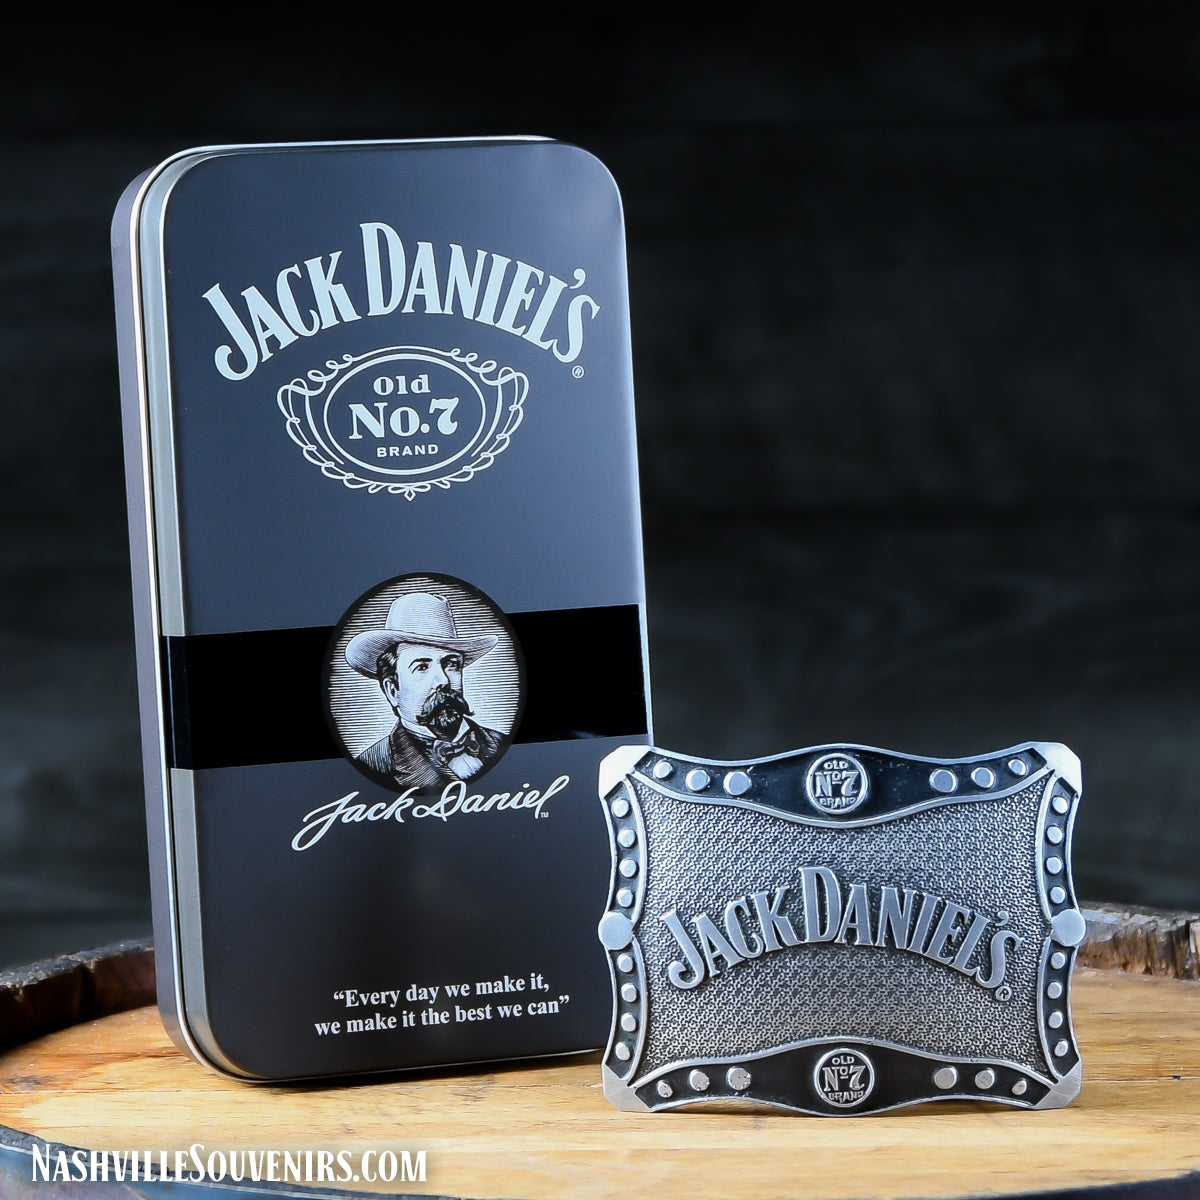 Strap your belt on with a licensed Jack Daniels Old No.7 Belt Buckle. Get one today with FREE SHIPPING on all US orders over $75!